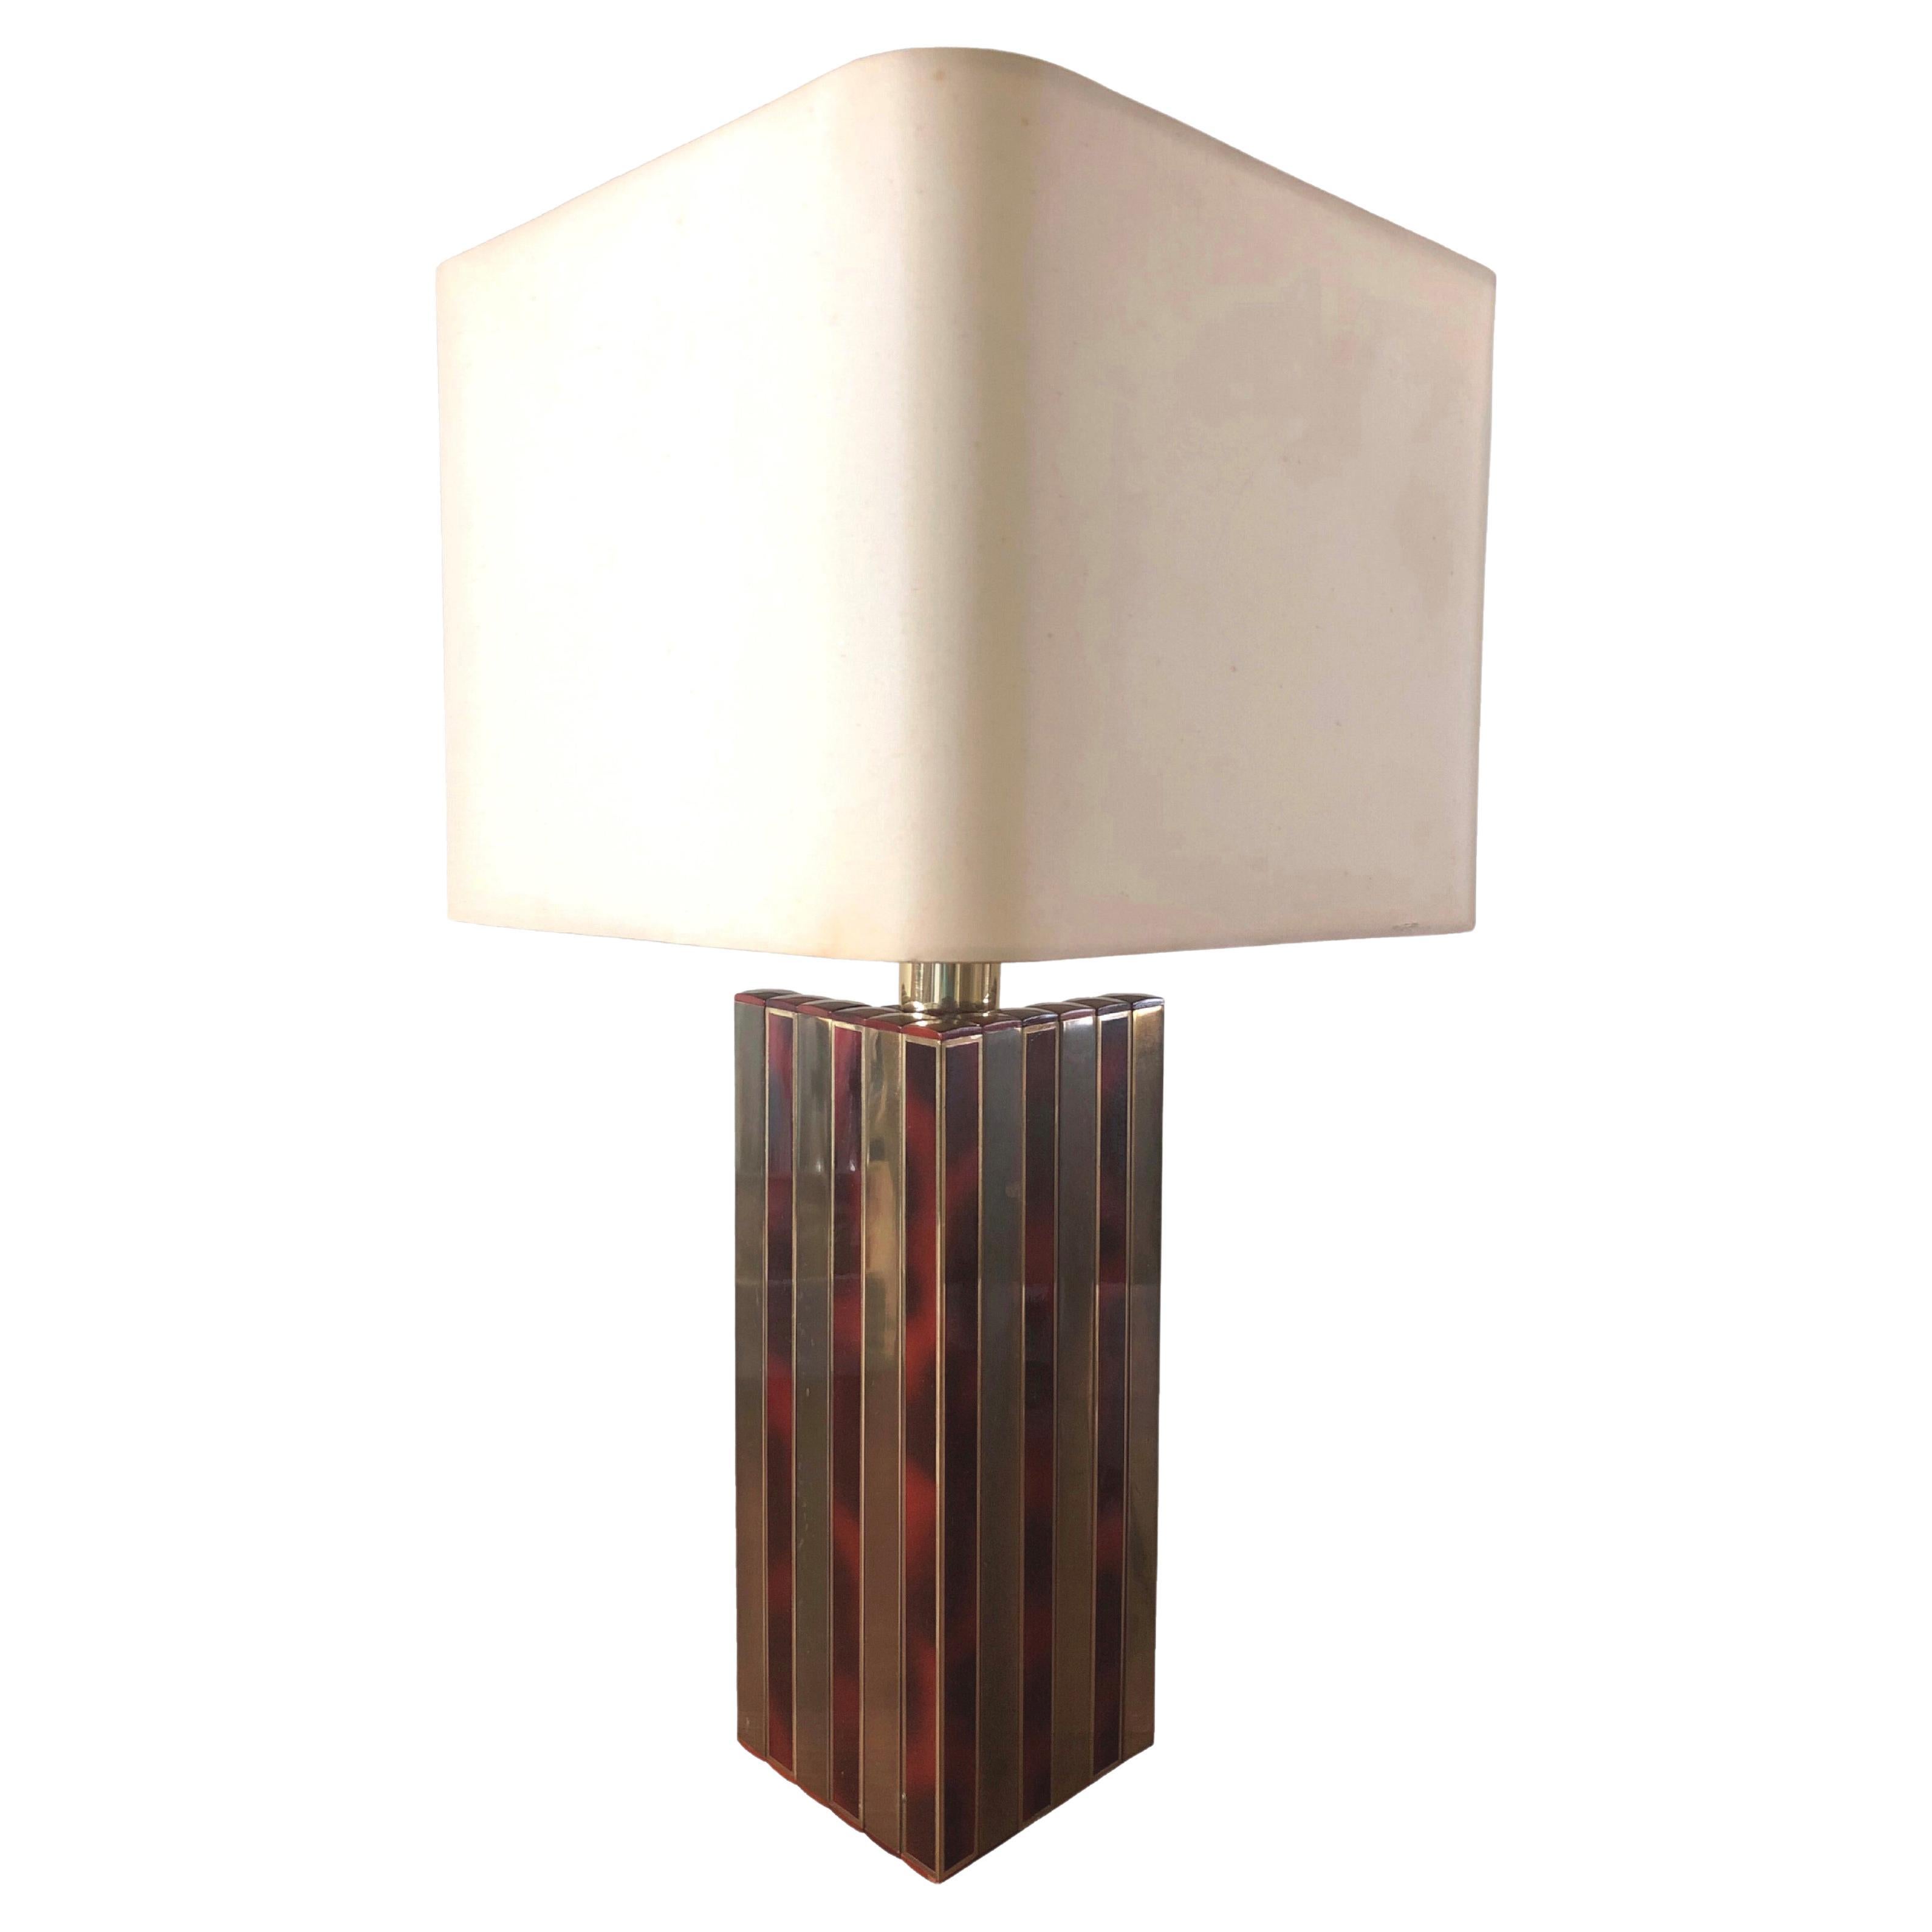 Midcentury Golden Brass and Tortoiseshell Enamel Table Lamp by BD Lumica, 1970s For Sale